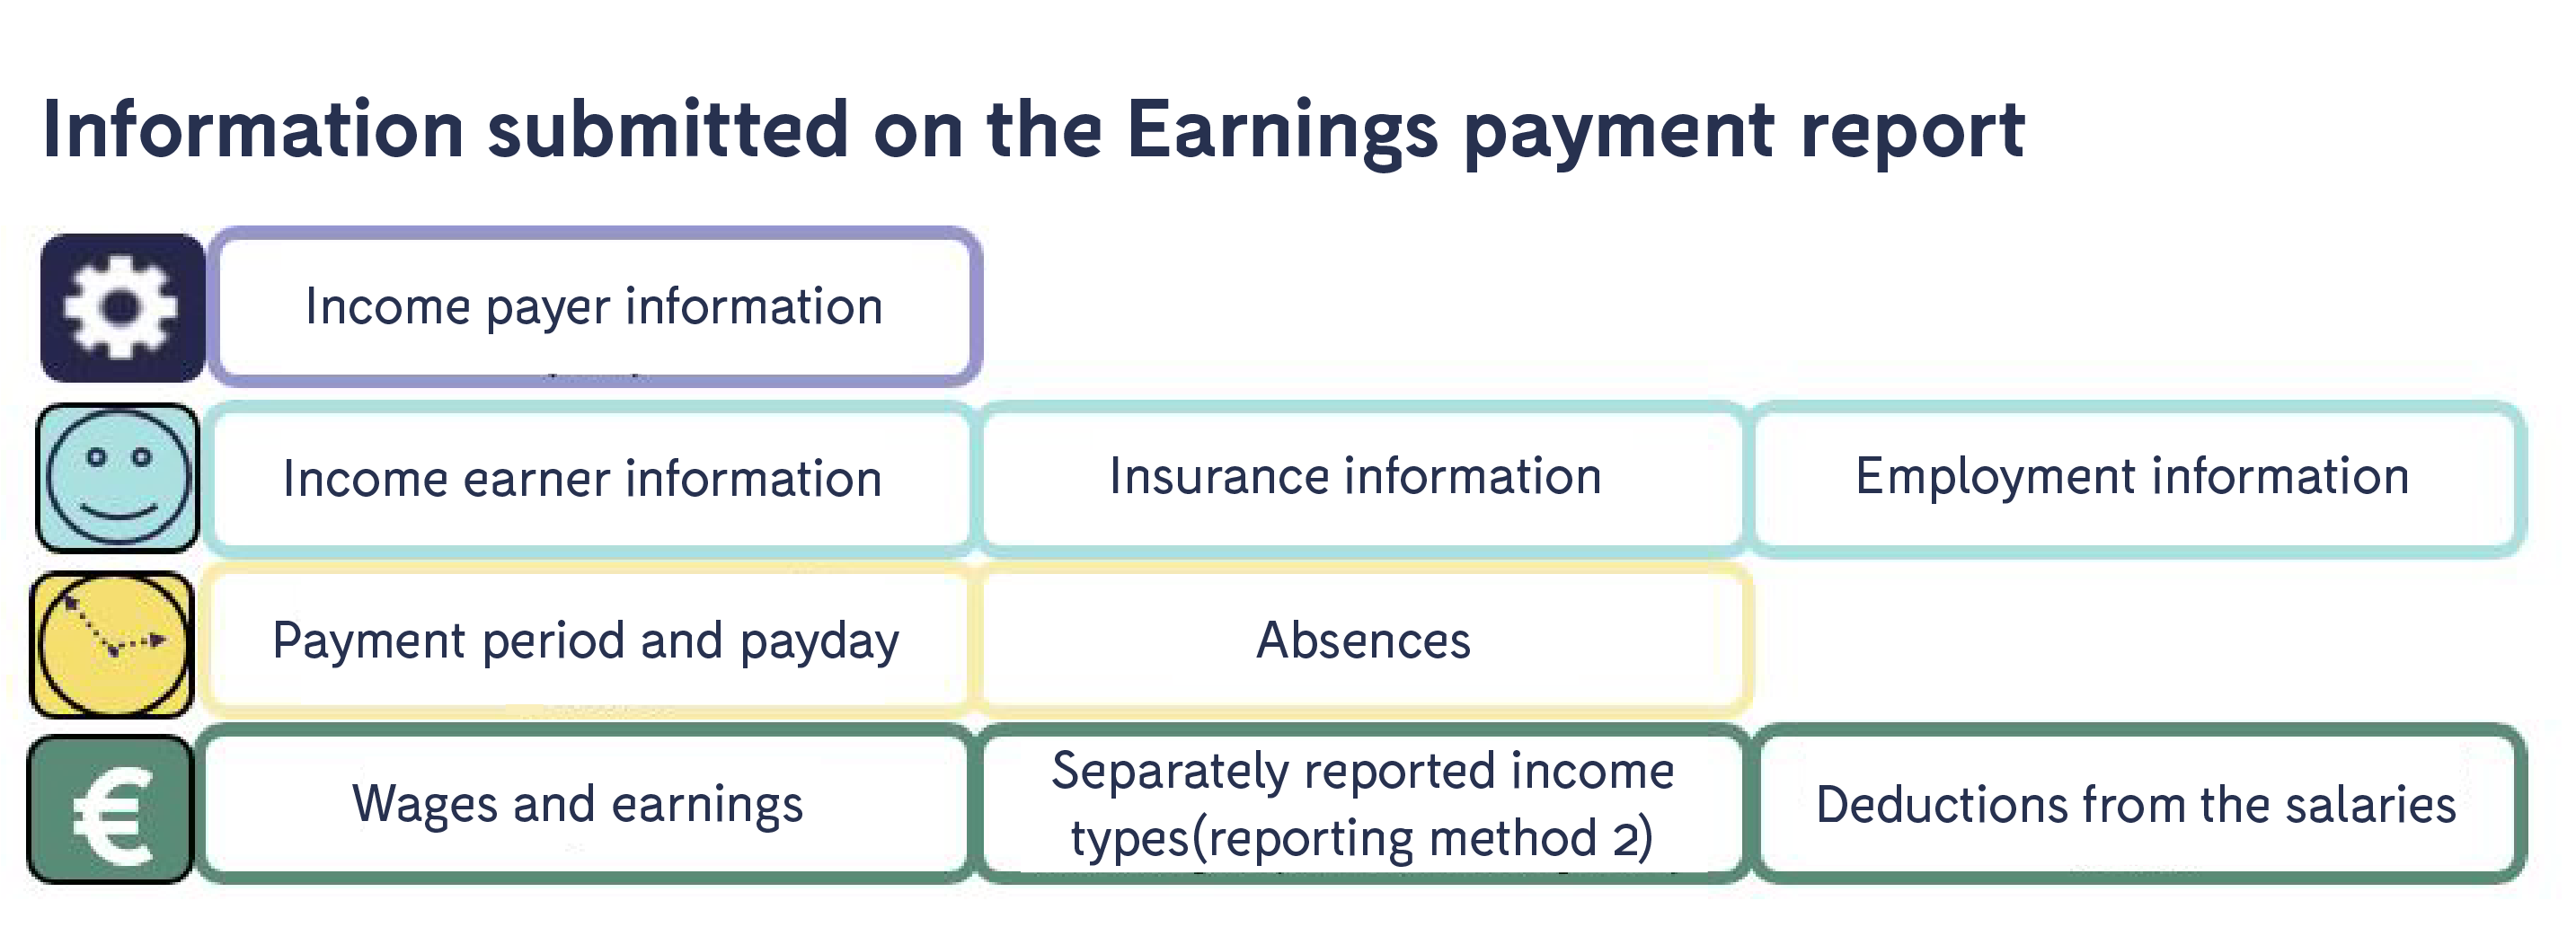 Information_submitted_on_the_Earnings_payment_report.png